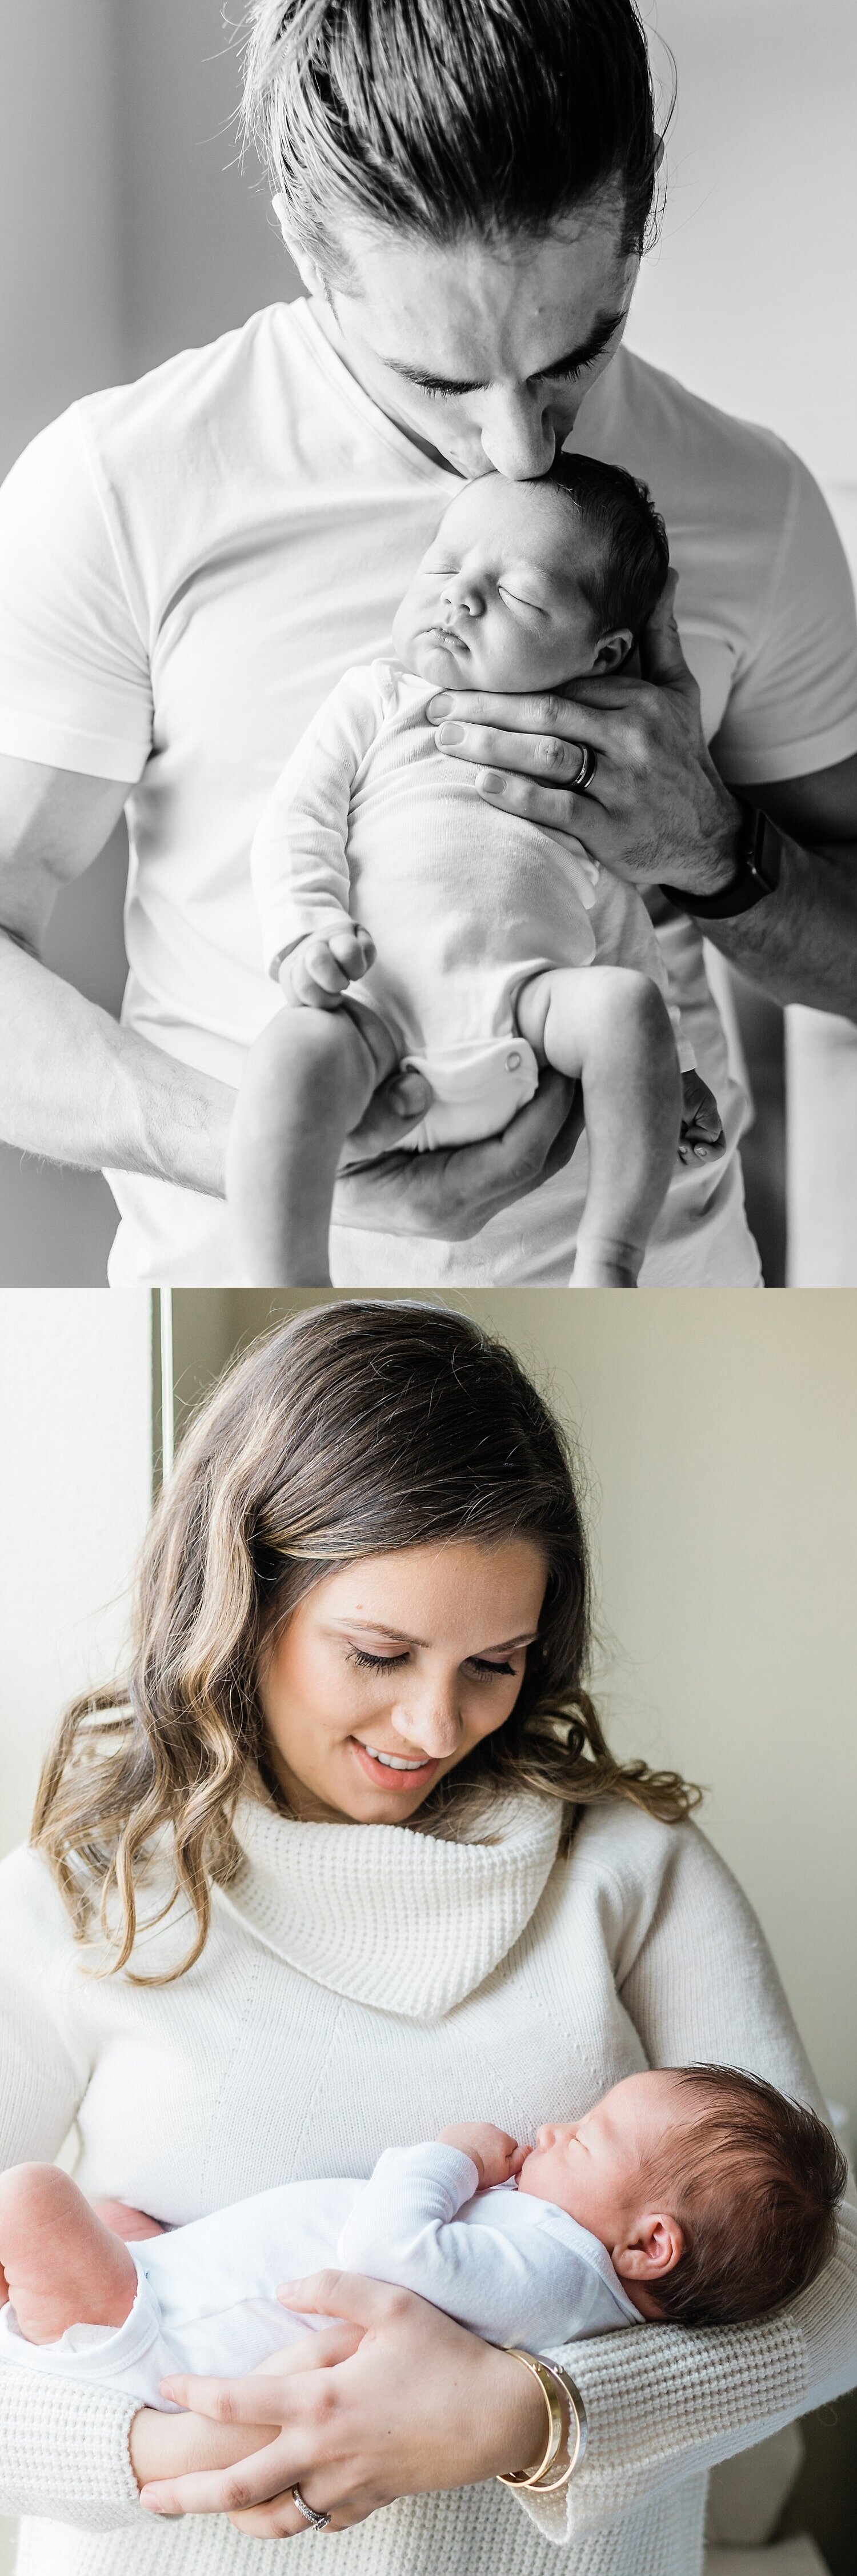 Baby Photography Poses You Can't Live Without | Madison, CT